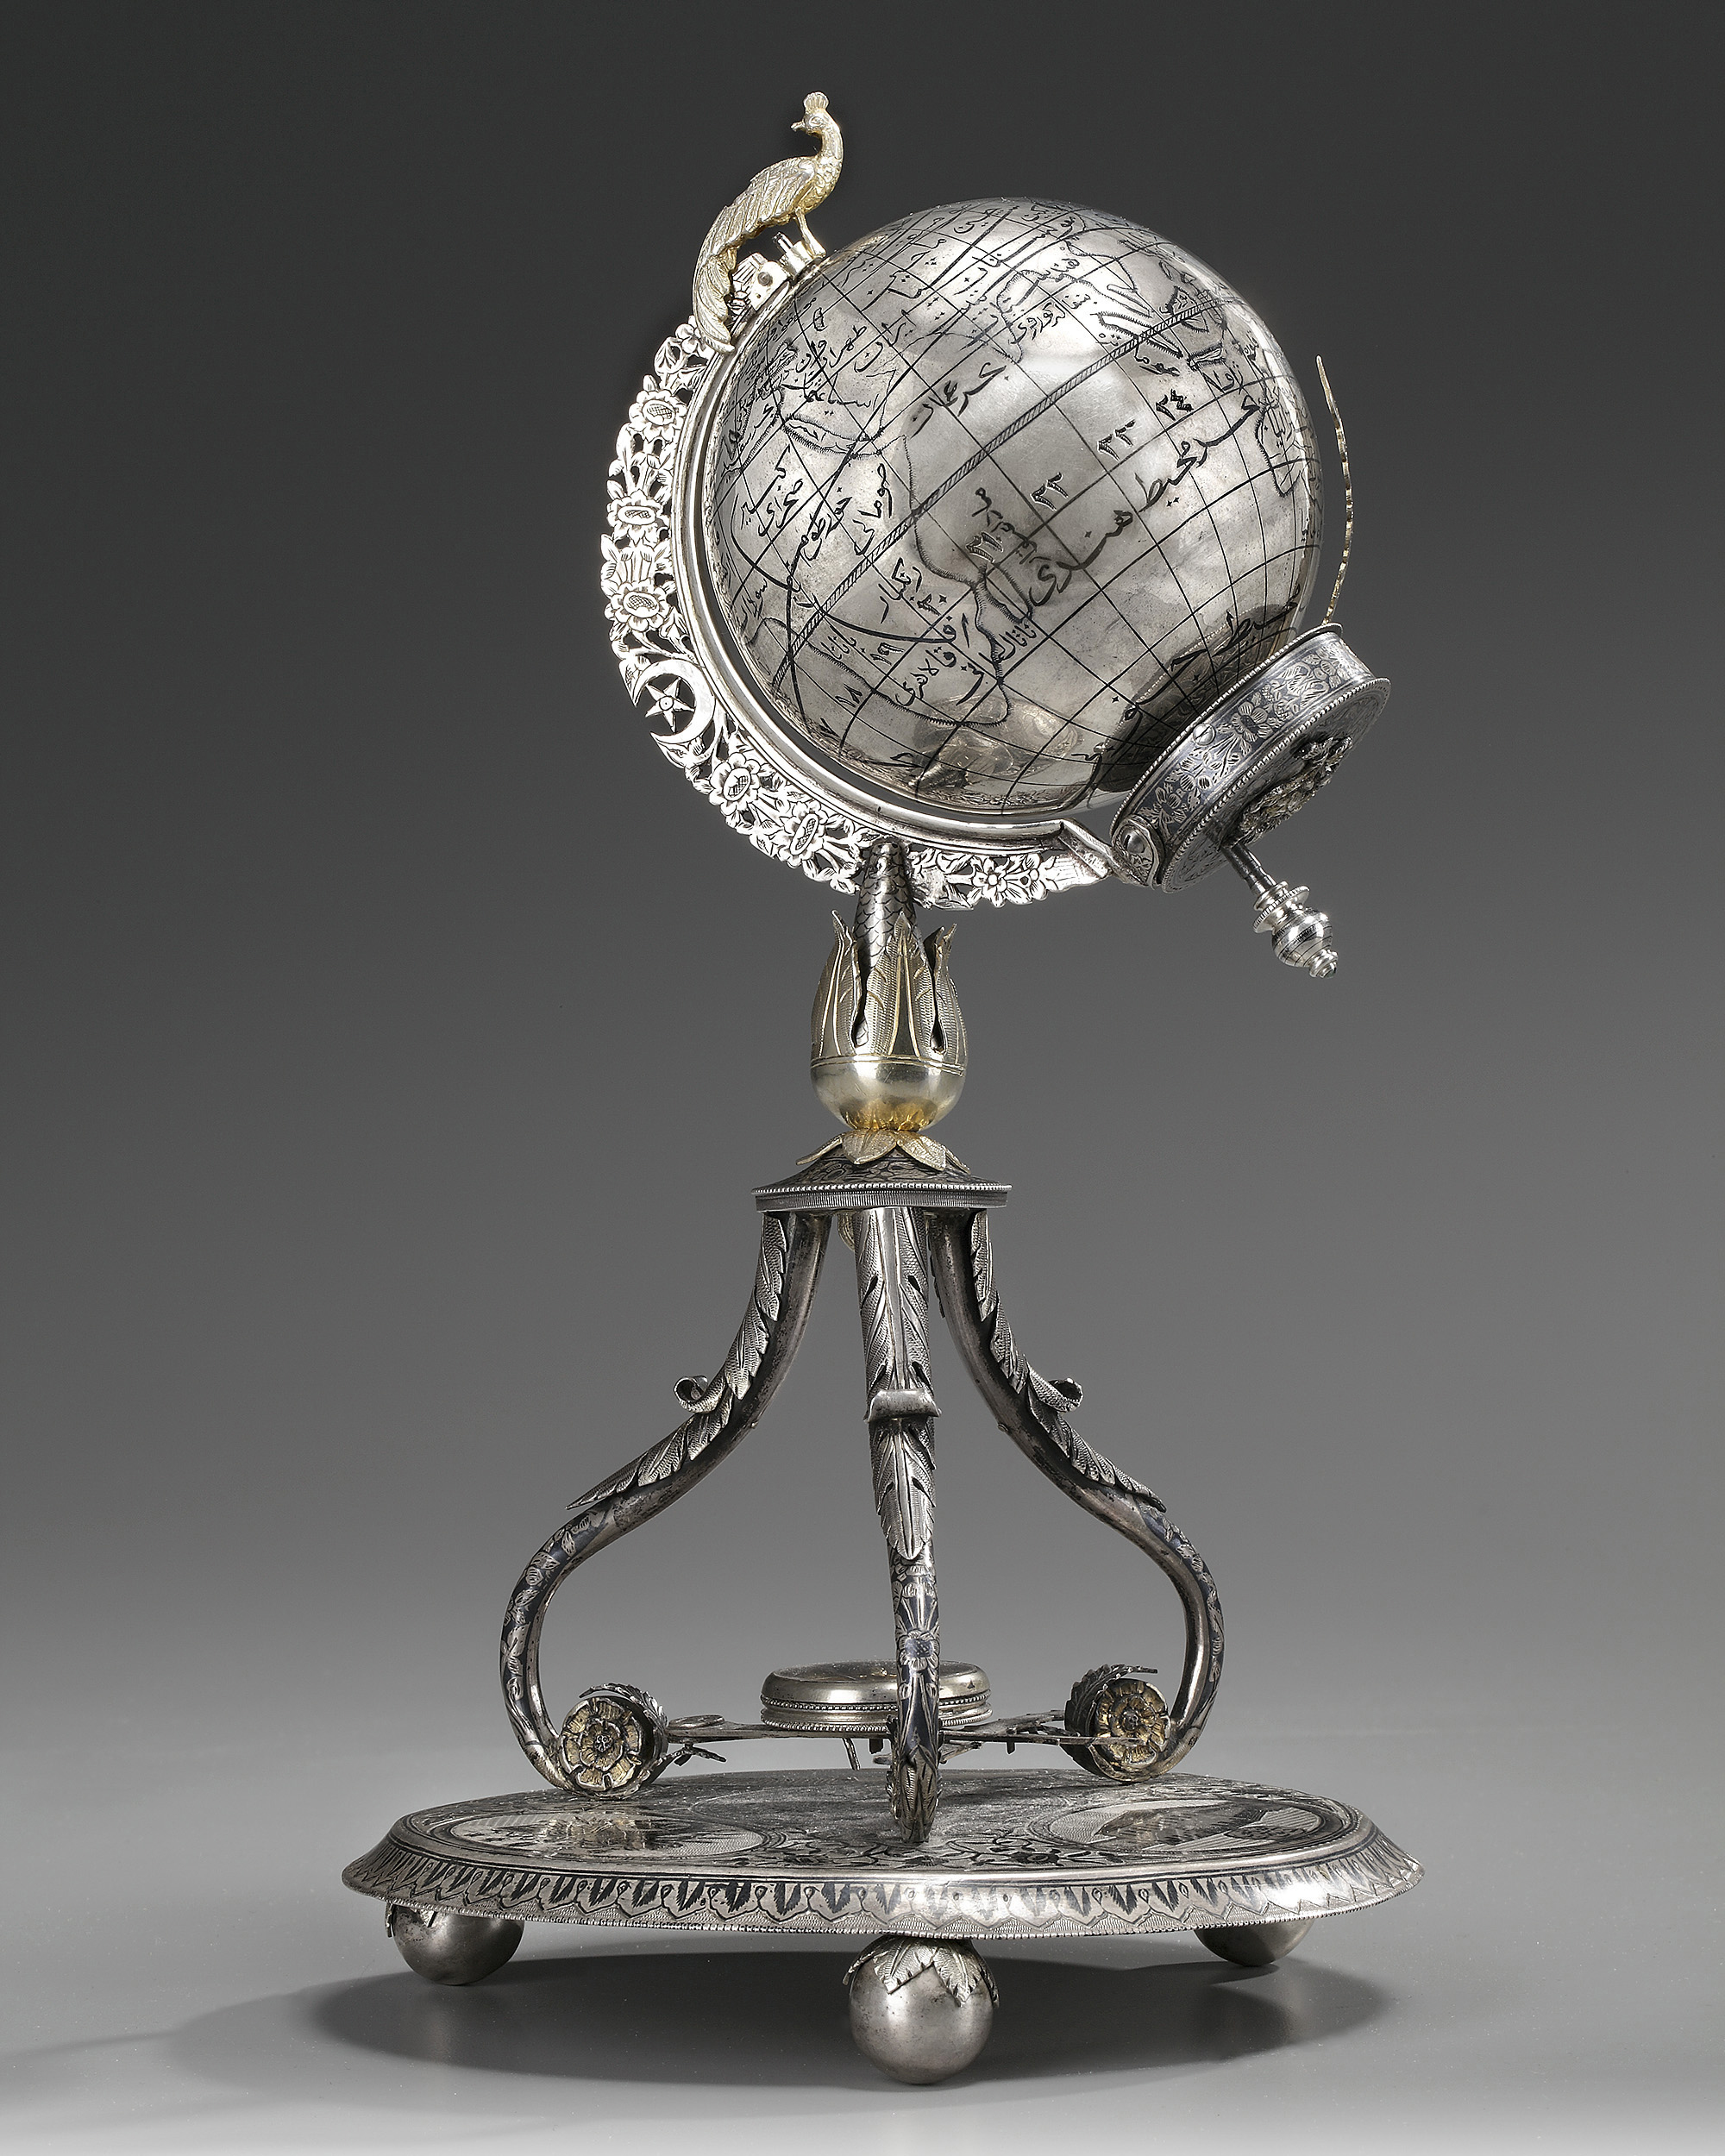 AN OTTOMAN SILVER, NIELLOED AND ENGRAVED GLOBE CLOCK BEARING THE TUGHRA OF SULTAN ABDULHAMID II TURK - Image 2 of 18